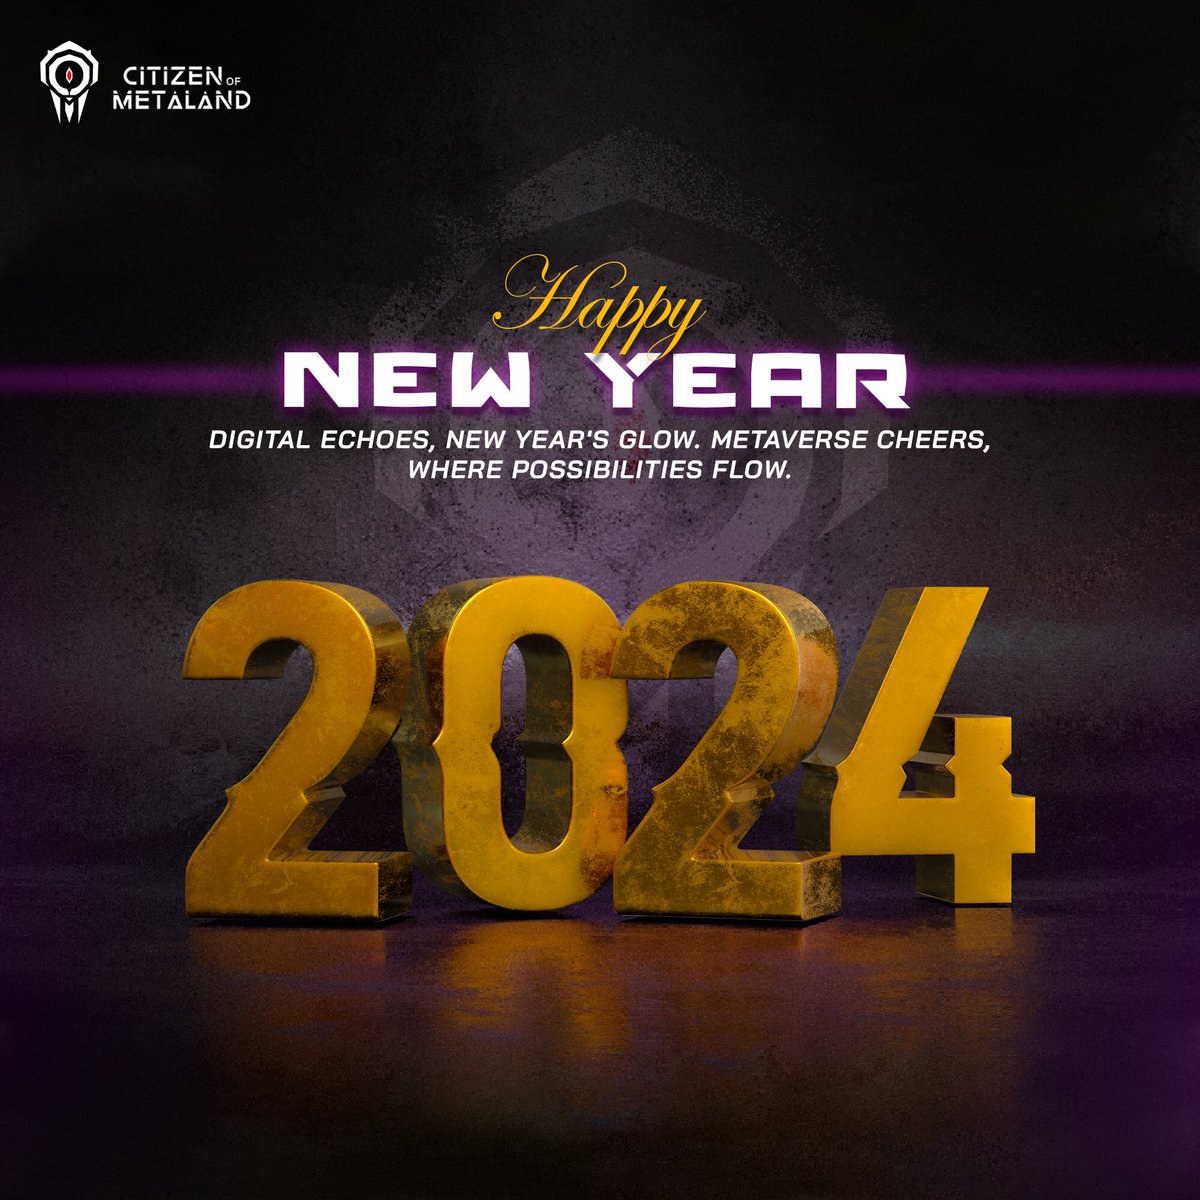 'Stepping into the #metaverse with style! ✨ #CitizenofMetaland wishes you all a Happy New Year filled with #blockchain breakthroughs, #augmented achievements , and limitless joy. Let’s make 2024 an unforgettable chapter in our digital saga!'🌐🥂#MetaverseCelebration…